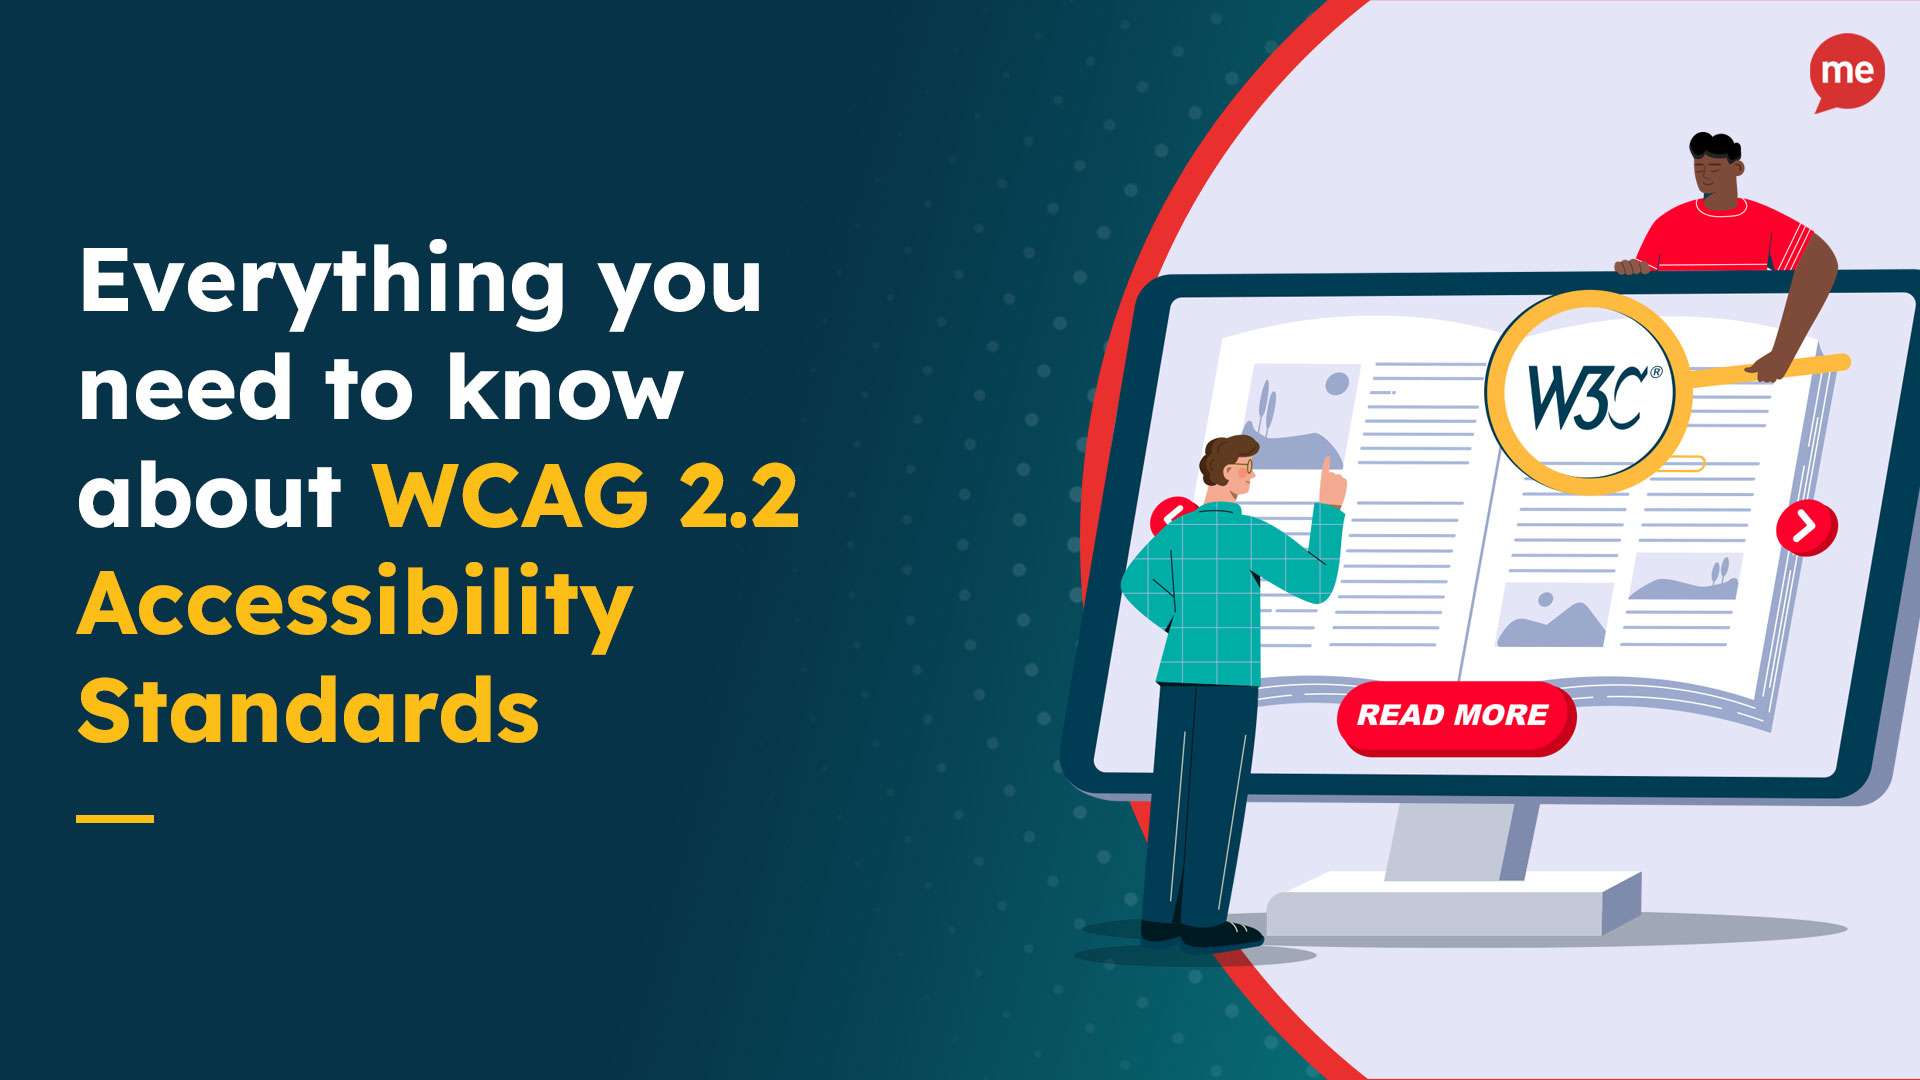 Everything you need to know about WCAG 2.2 Accessibility Standards